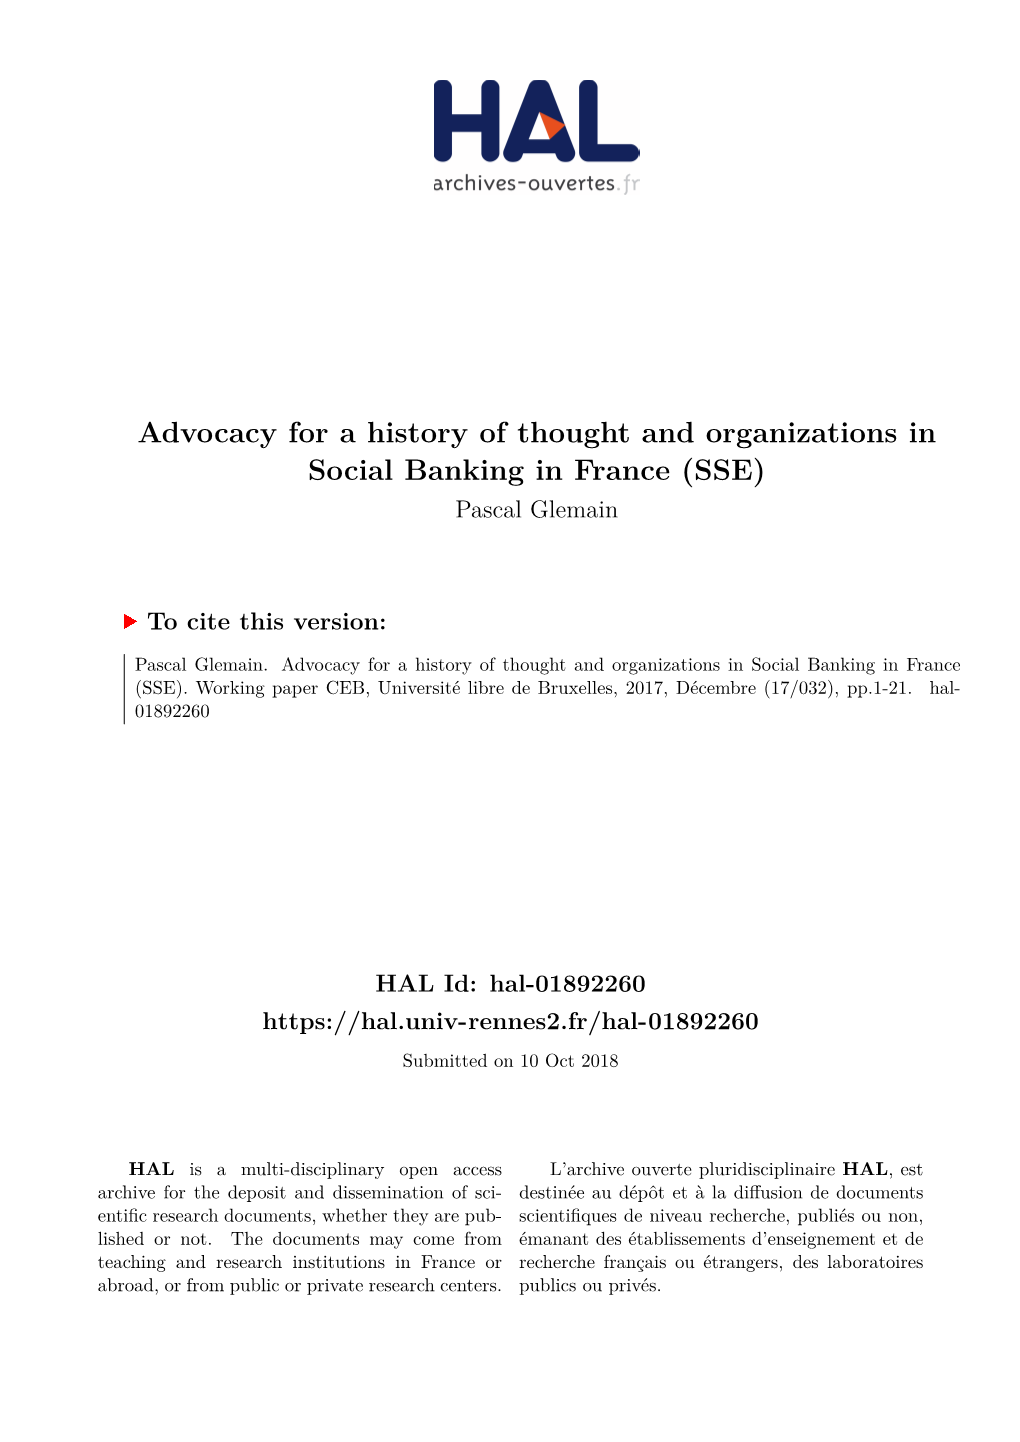 Advocacy for a History of Thought and Organizations in Social Banking in France (SSE) Pascal Glemain